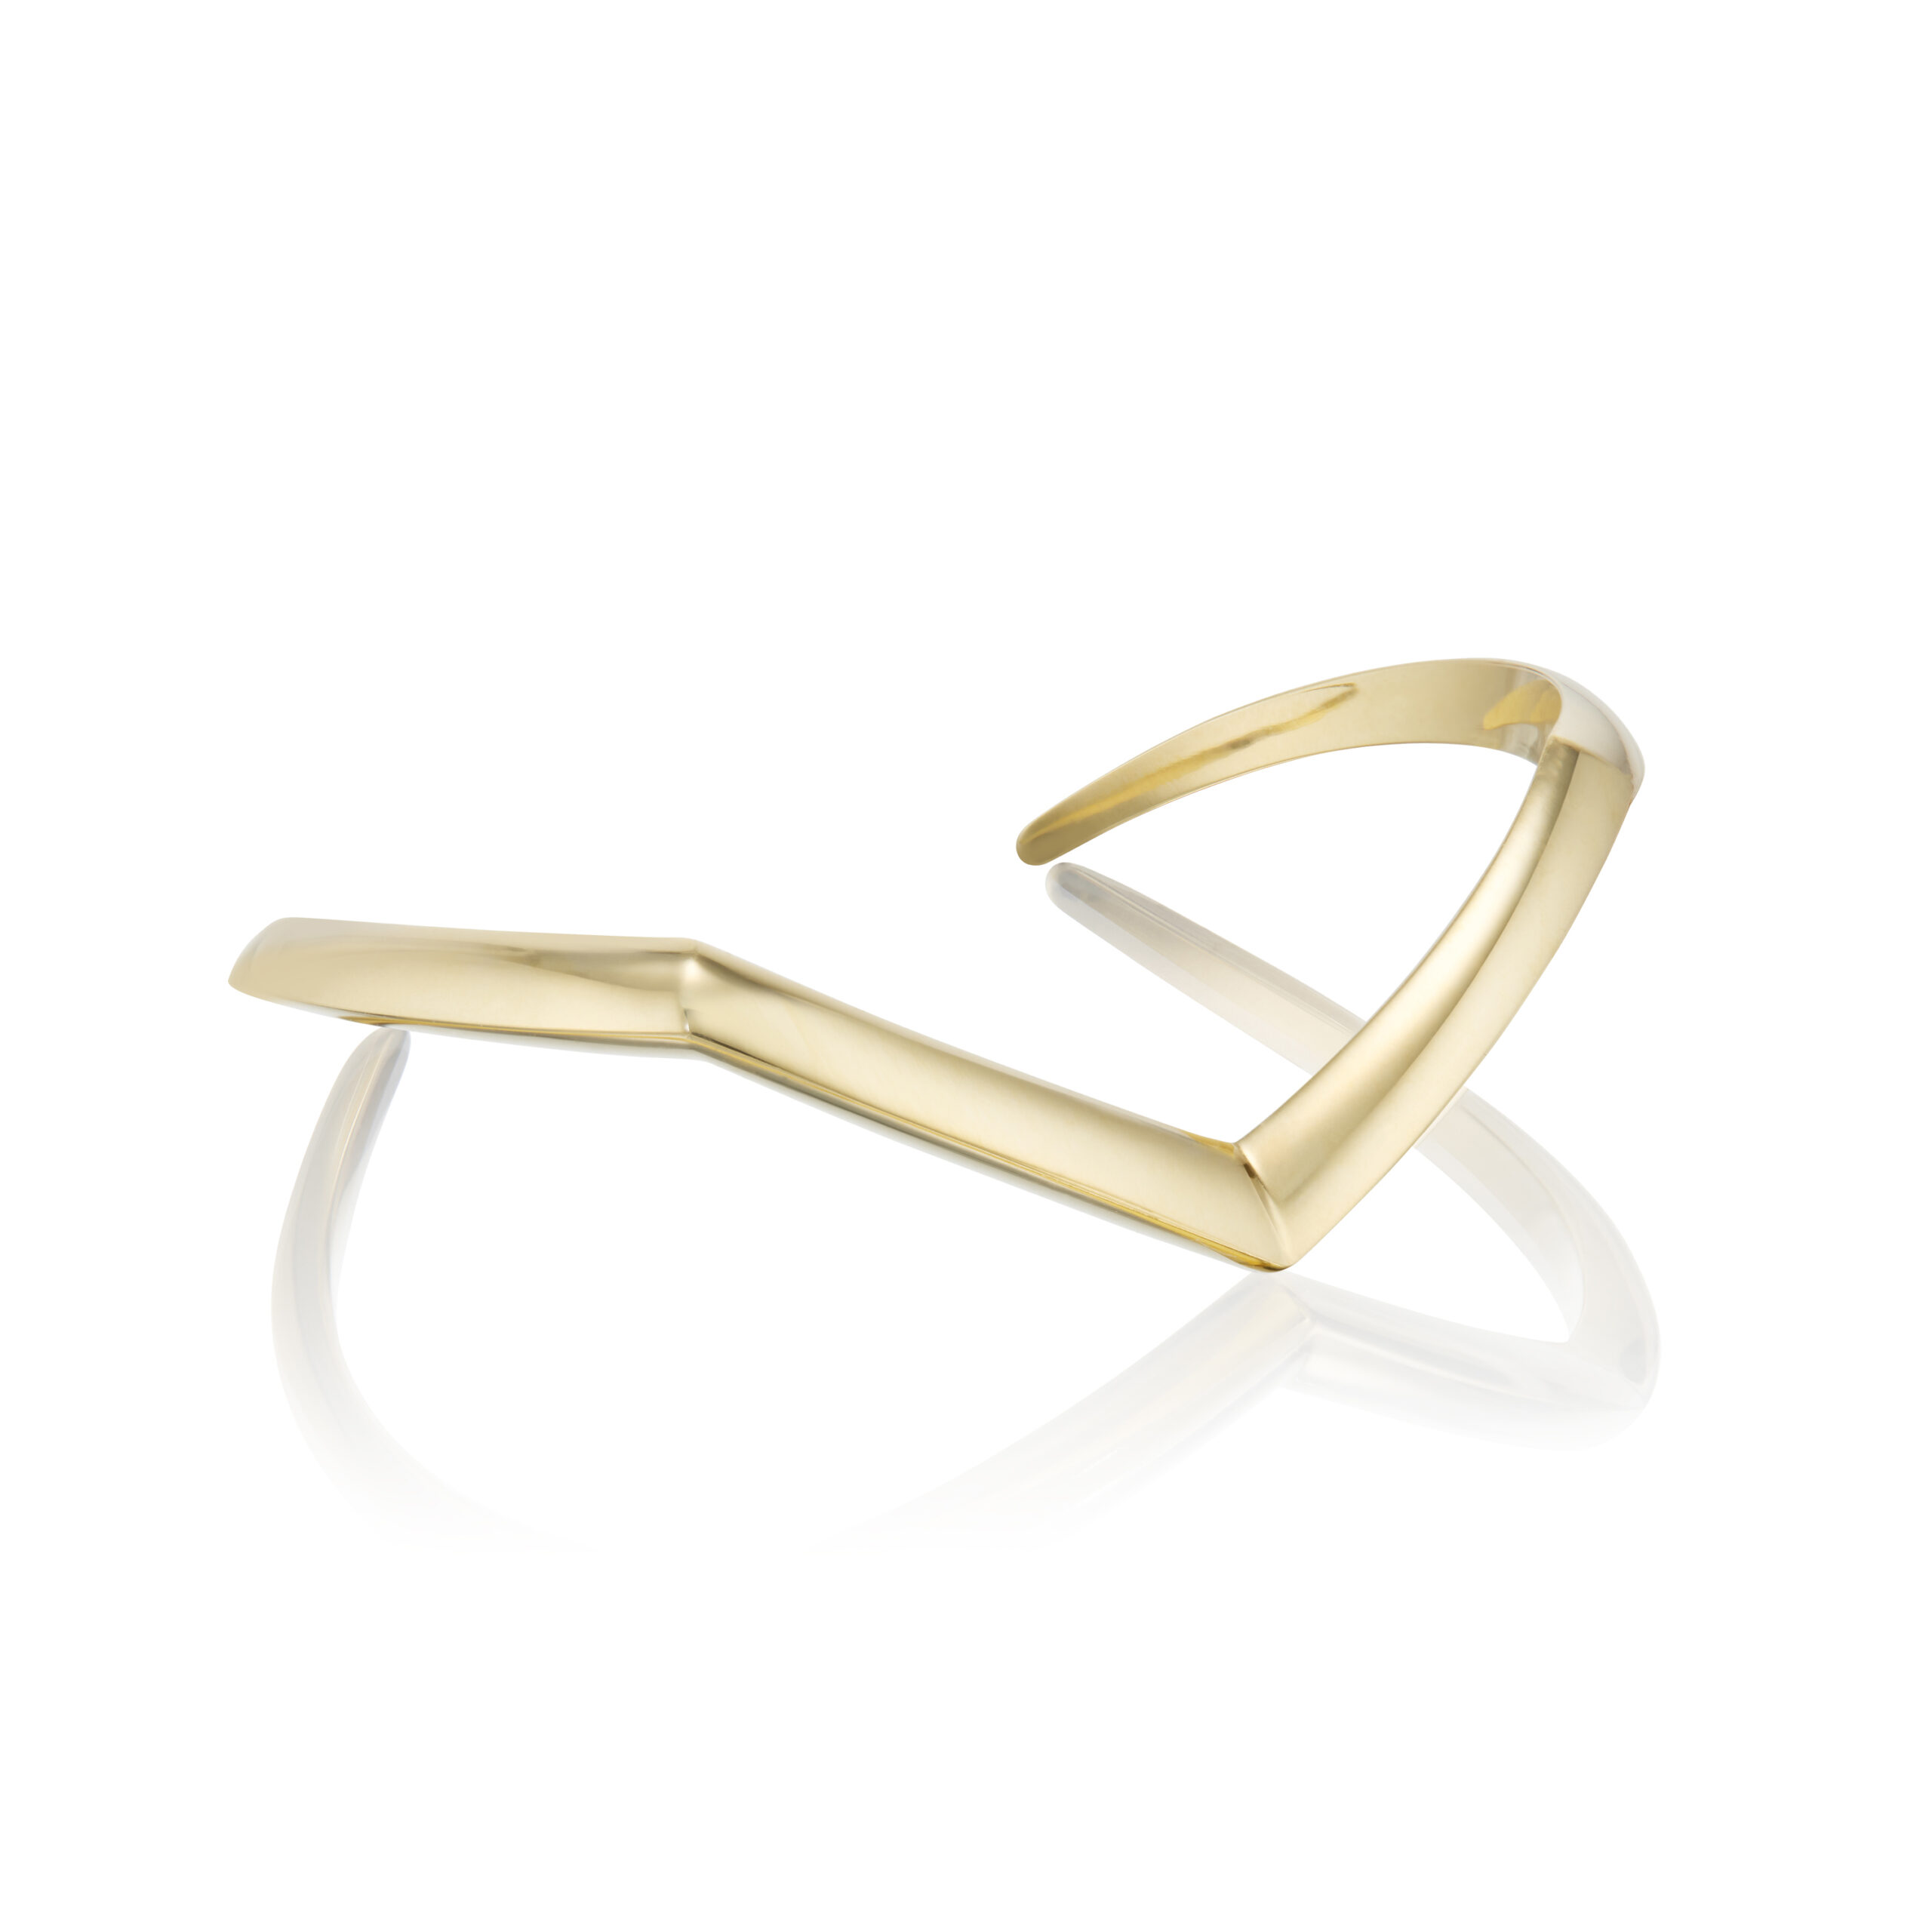 This a product photo of the Renisis Skywalk Single Wrist Cuff. It is crafted in 18k yellow gold and has a sharply bent shape.